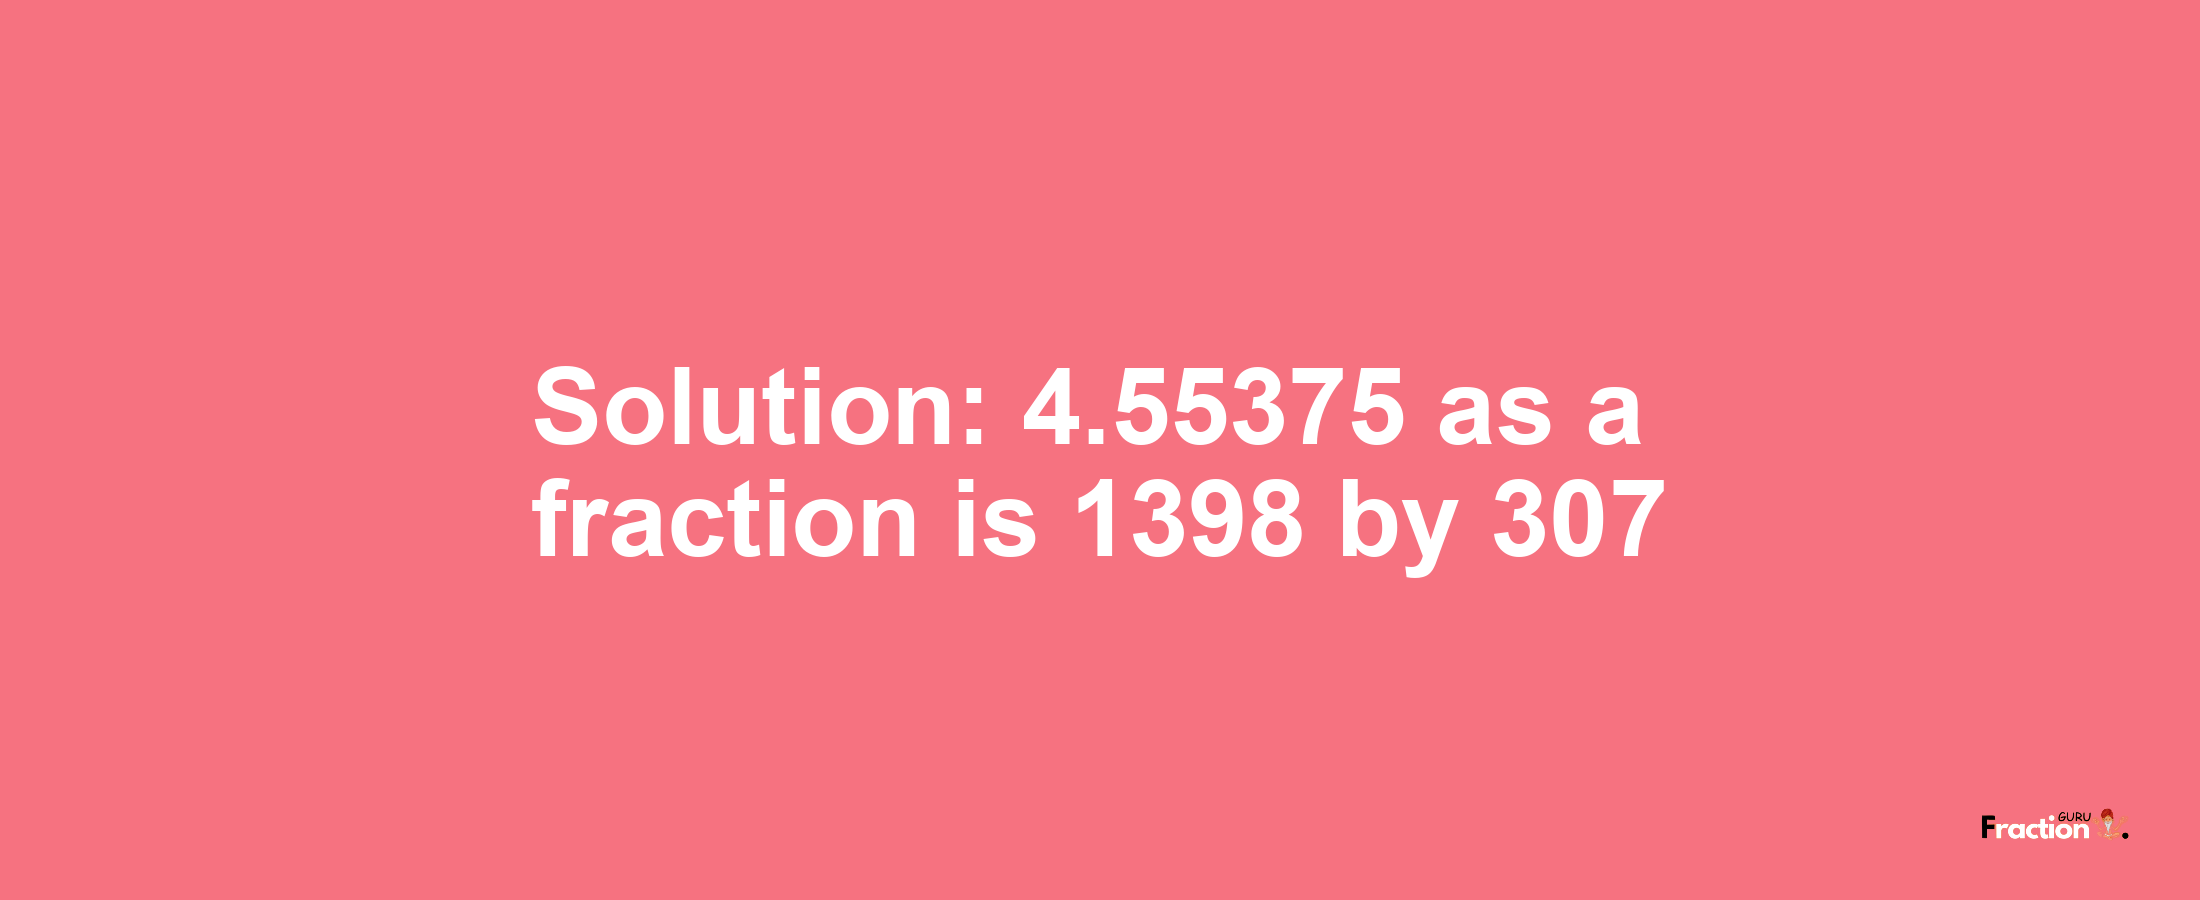 Solution:4.55375 as a fraction is 1398/307